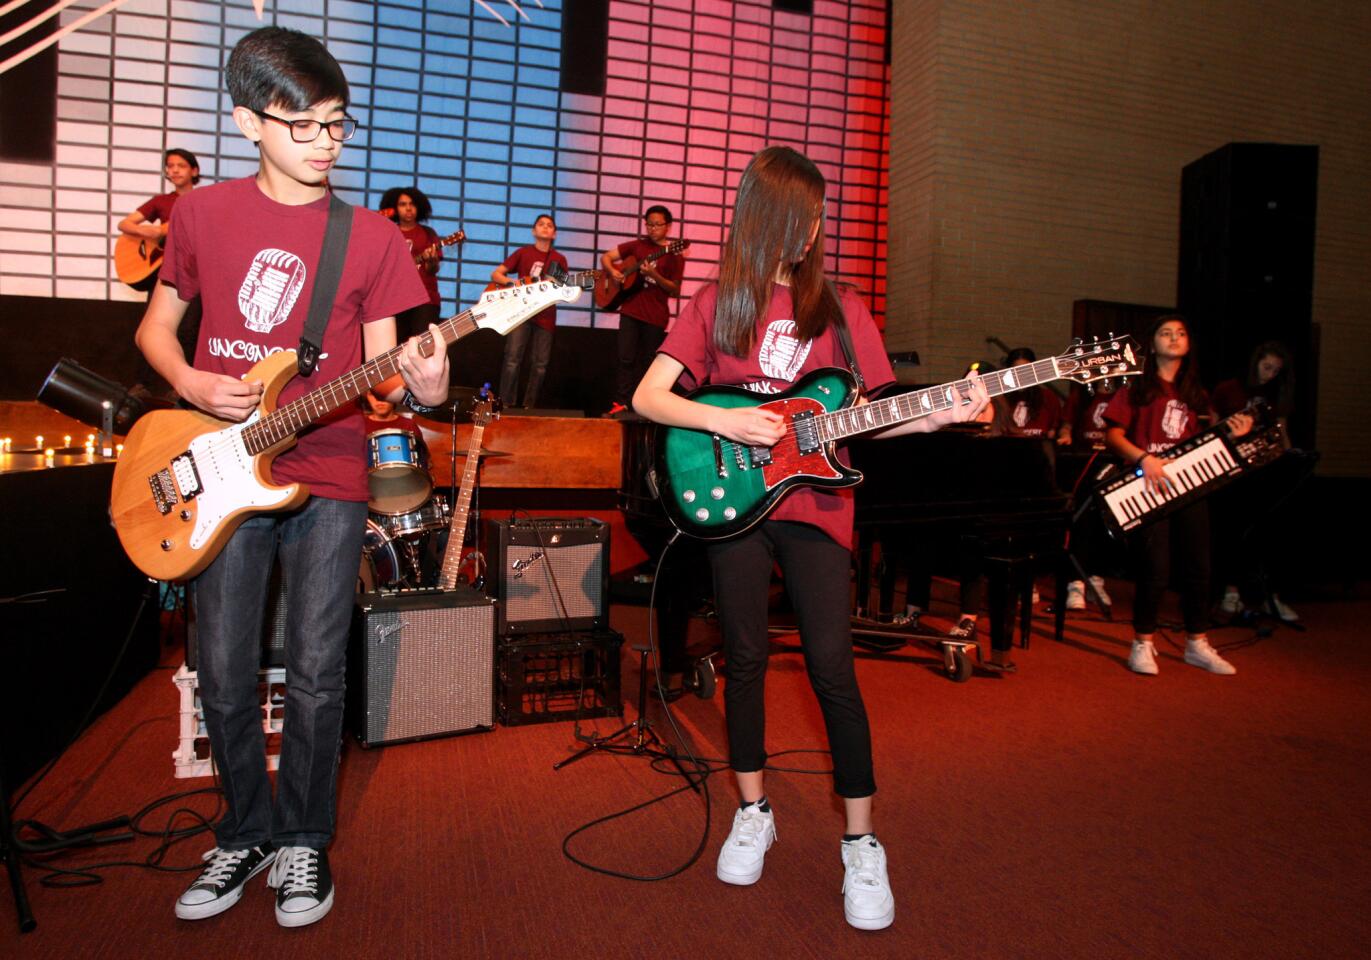 Wilson Middle School 8th grade music students Vince Hiliham, left, and Kyanna Bartolome rock away with 32 other classmates at the Unconcert '16 assembly at Glendale High School's John Wayne Performing Arts Center in Glendale on Thursday, Feb. 11, 2016. The Unconcert '16 included more than a dozen musical acts performed by Glendale High School students.